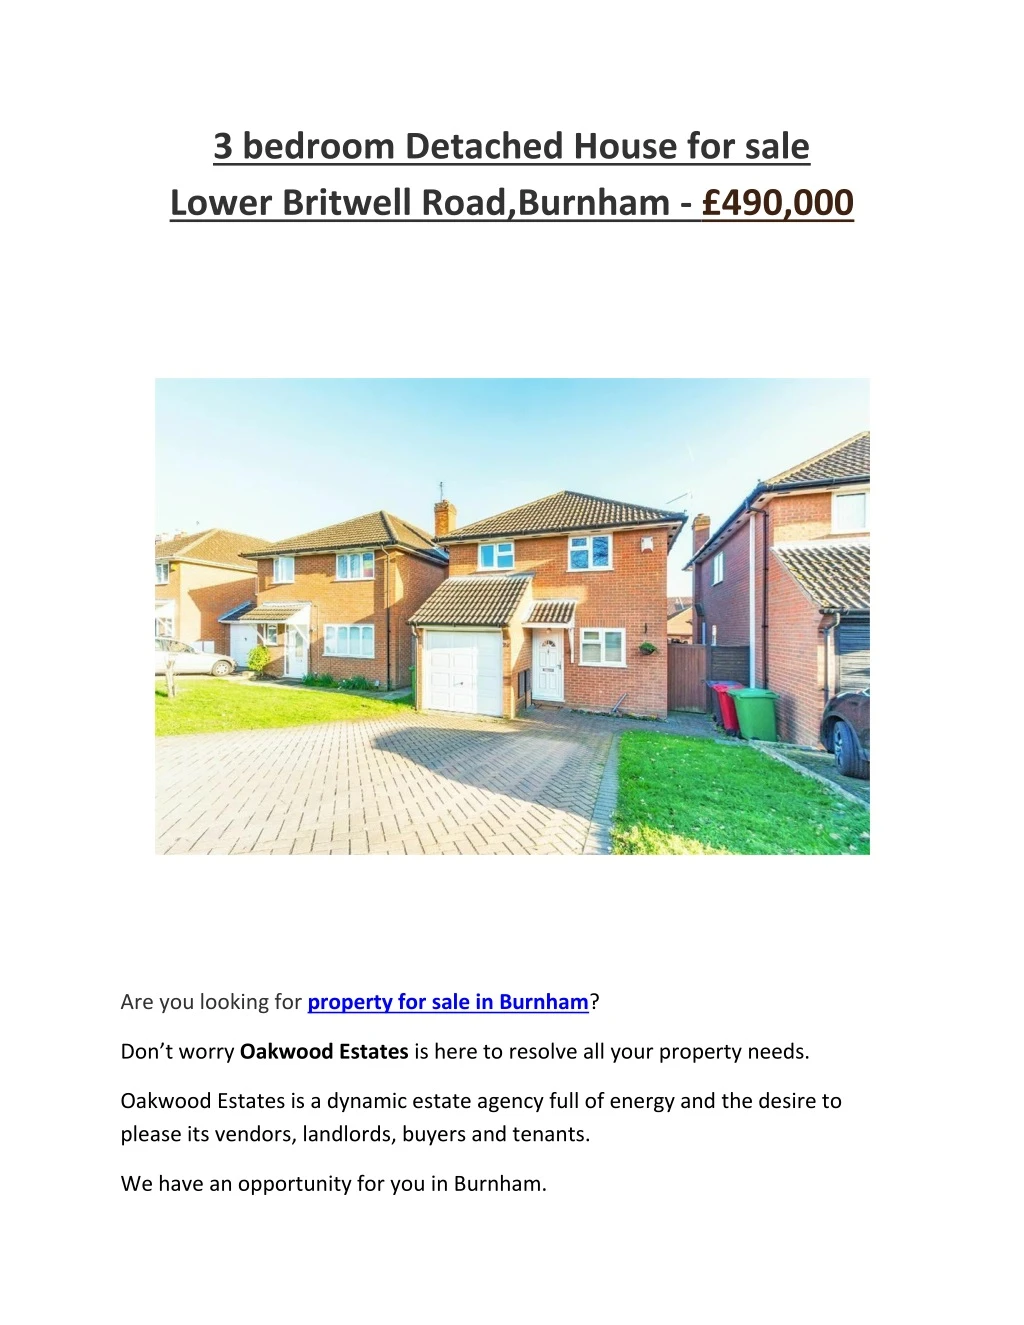 3 bedroom detached house for sale lower britwell